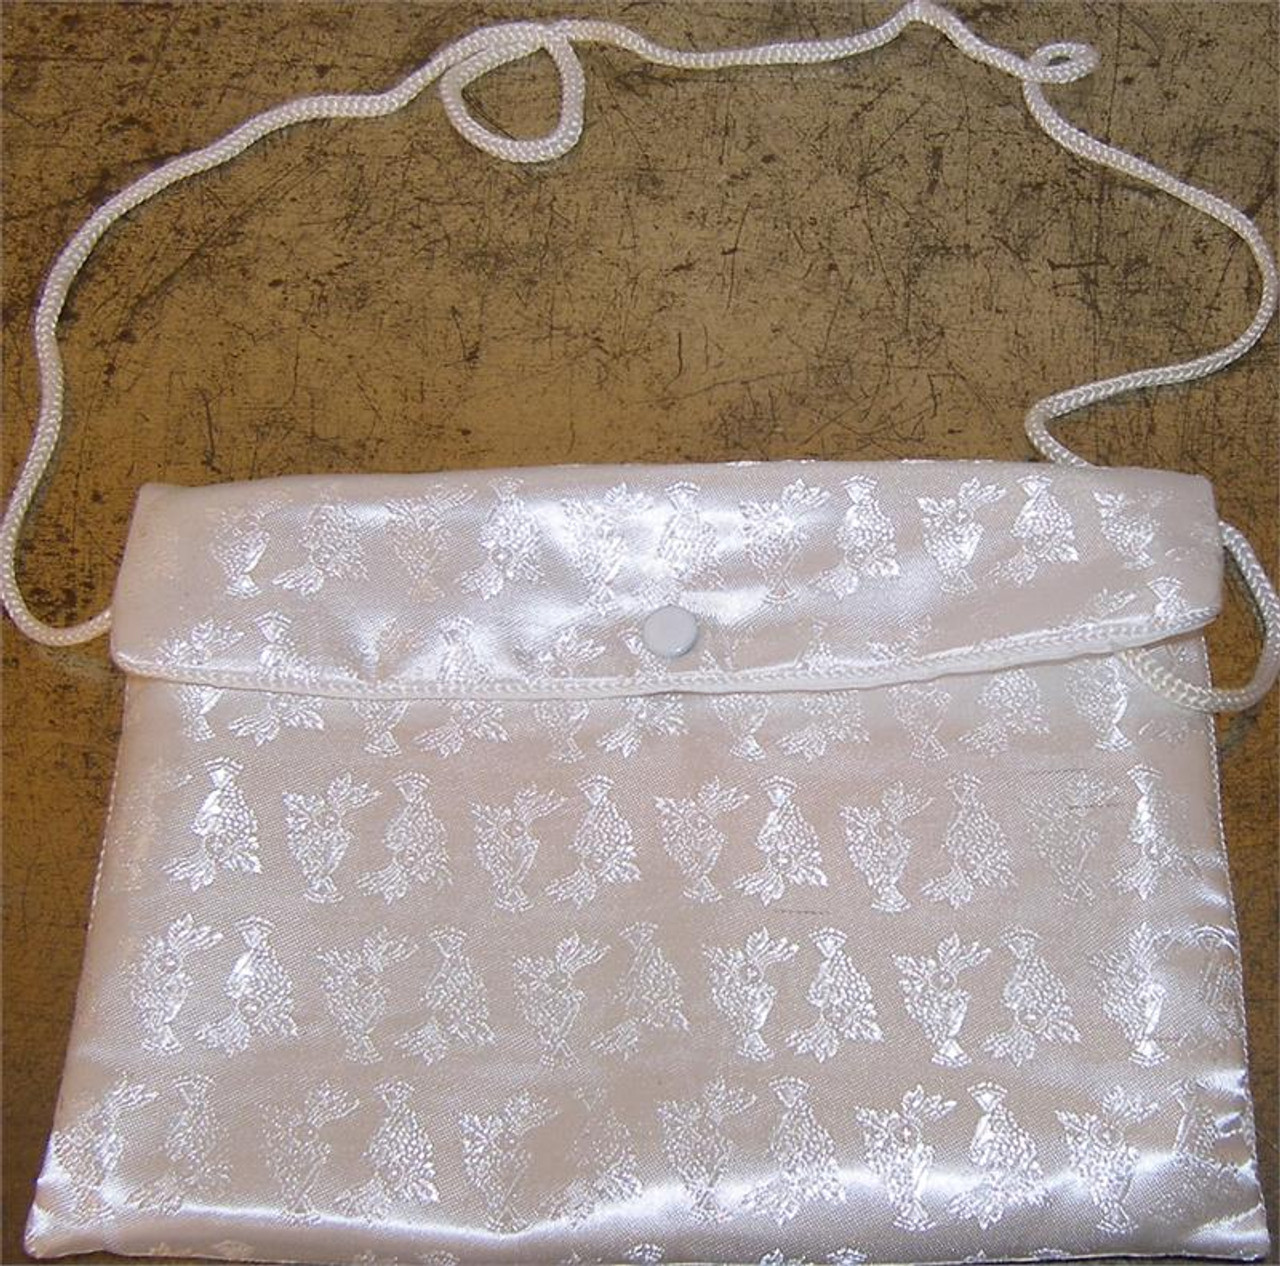 Satin First Communion Purse with Lace Applique with a Bead and Pearl Handle